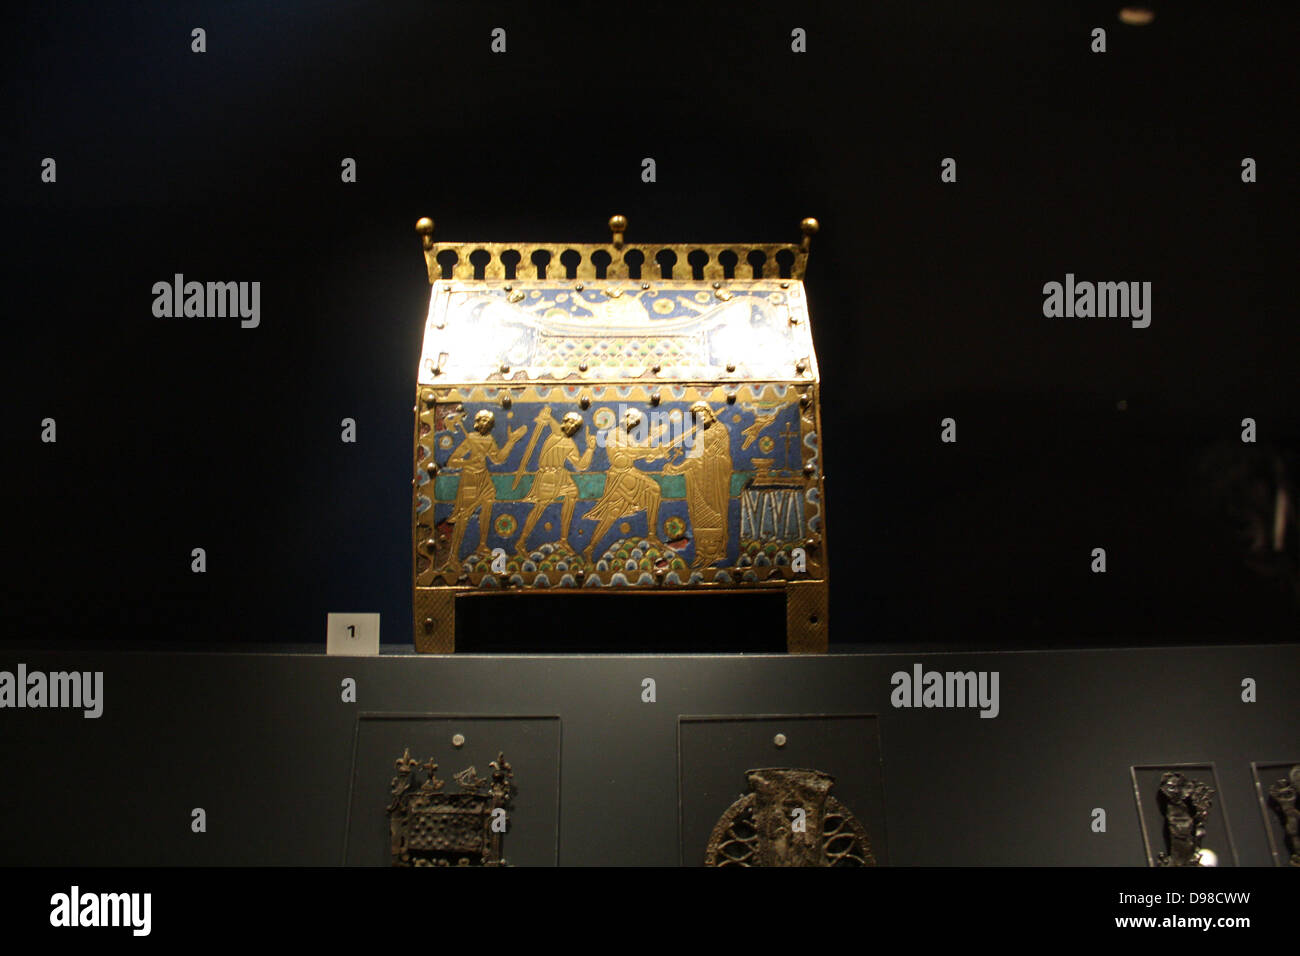 Reliquary casket of St. Thomas Becket. Gilt and copper alloy with enamel set on wood. Made around 1200 at Limoges, France. Depicts death and burial of the Saint. Thomas Becket (1118 – 29 December 1170), later also known as Thomas à Becket, was Archbishop of Canterbury from 1162 until his murder in 1170. Stock Photo